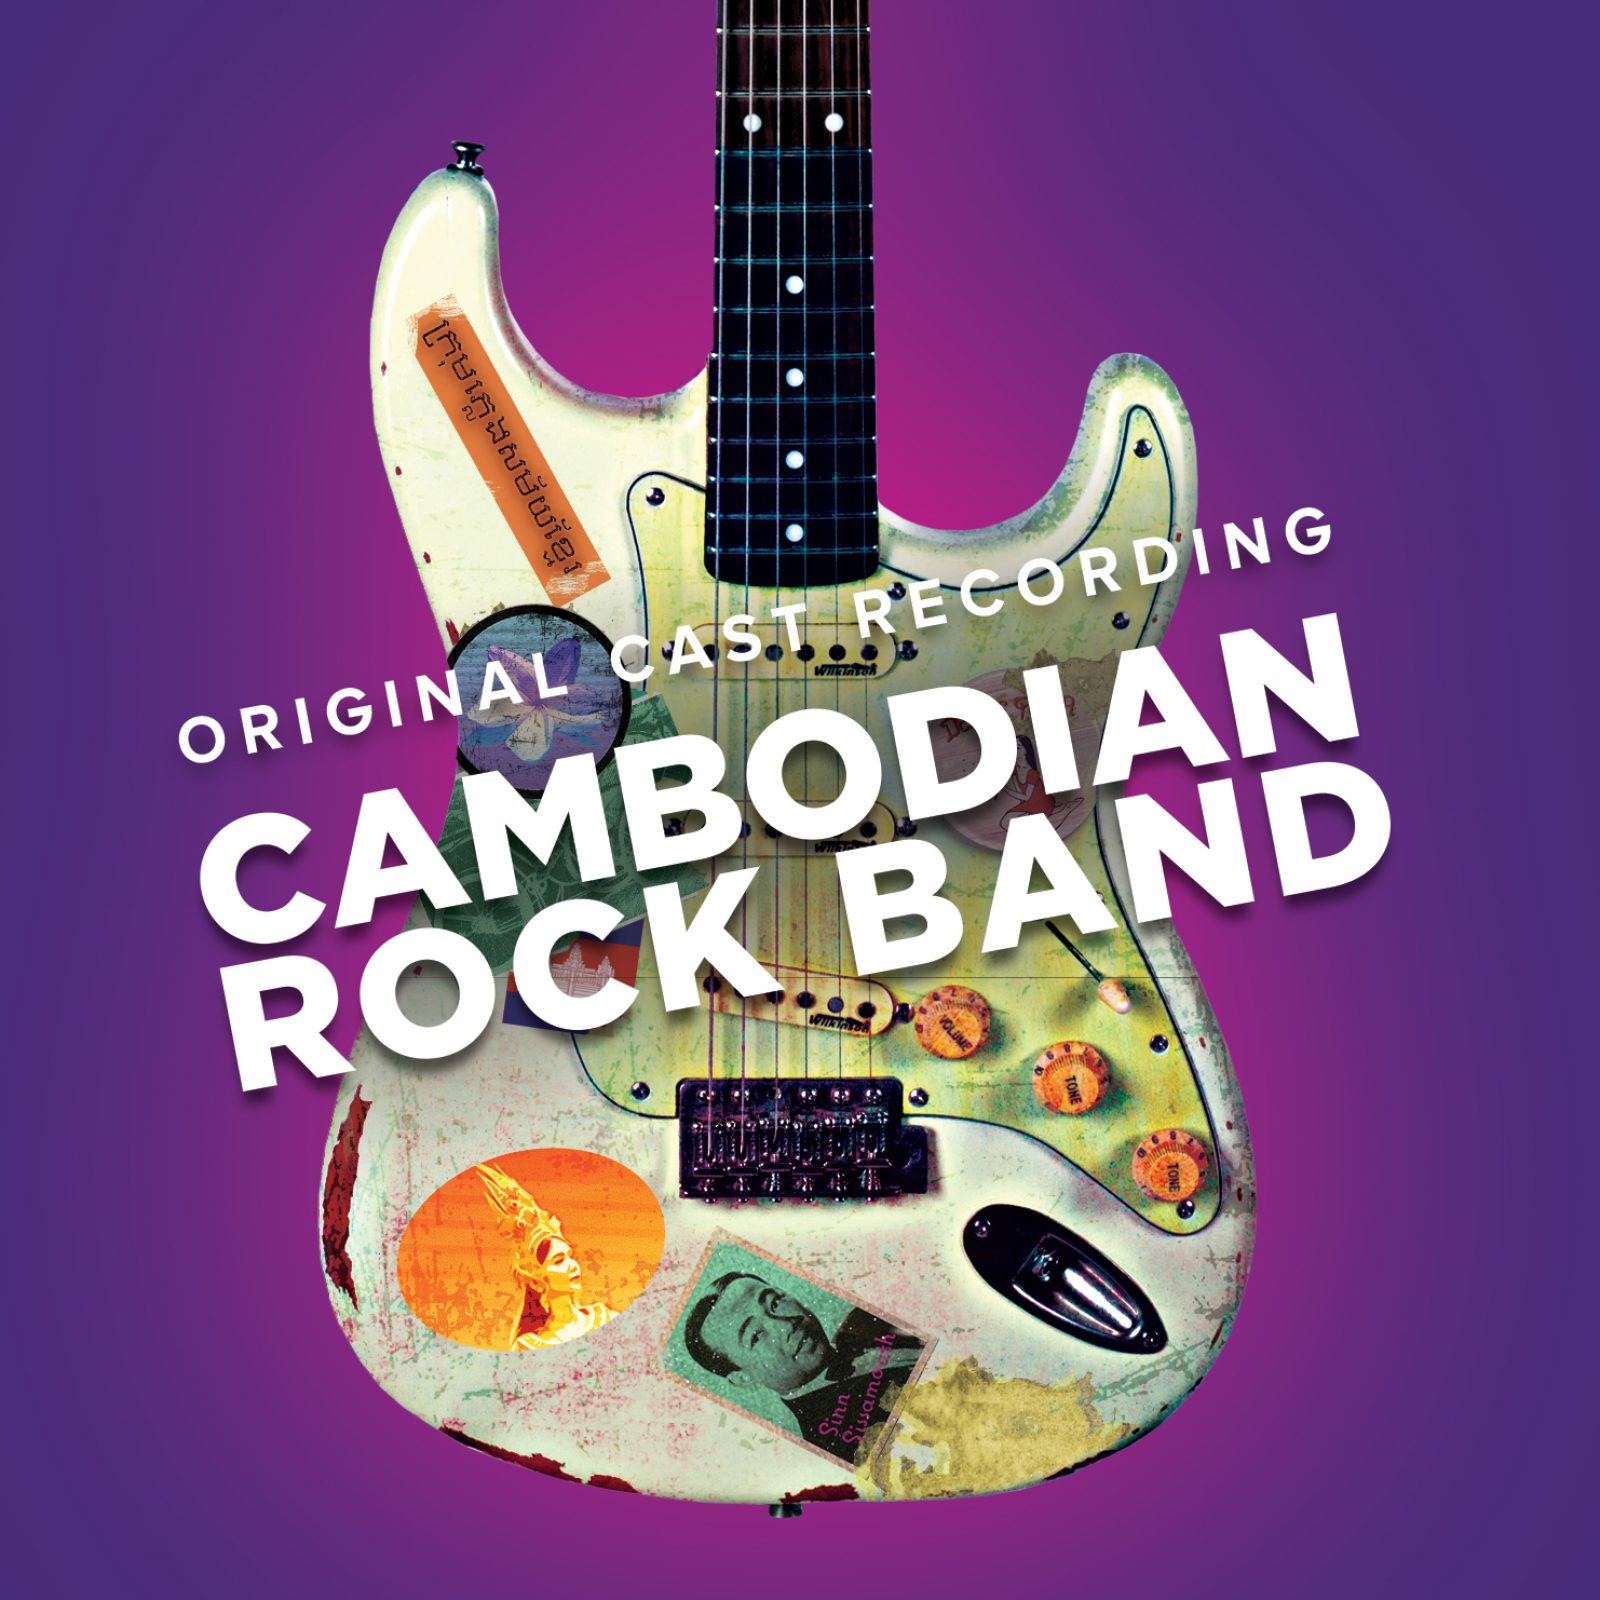 Cambodian Rock Band on iTunes